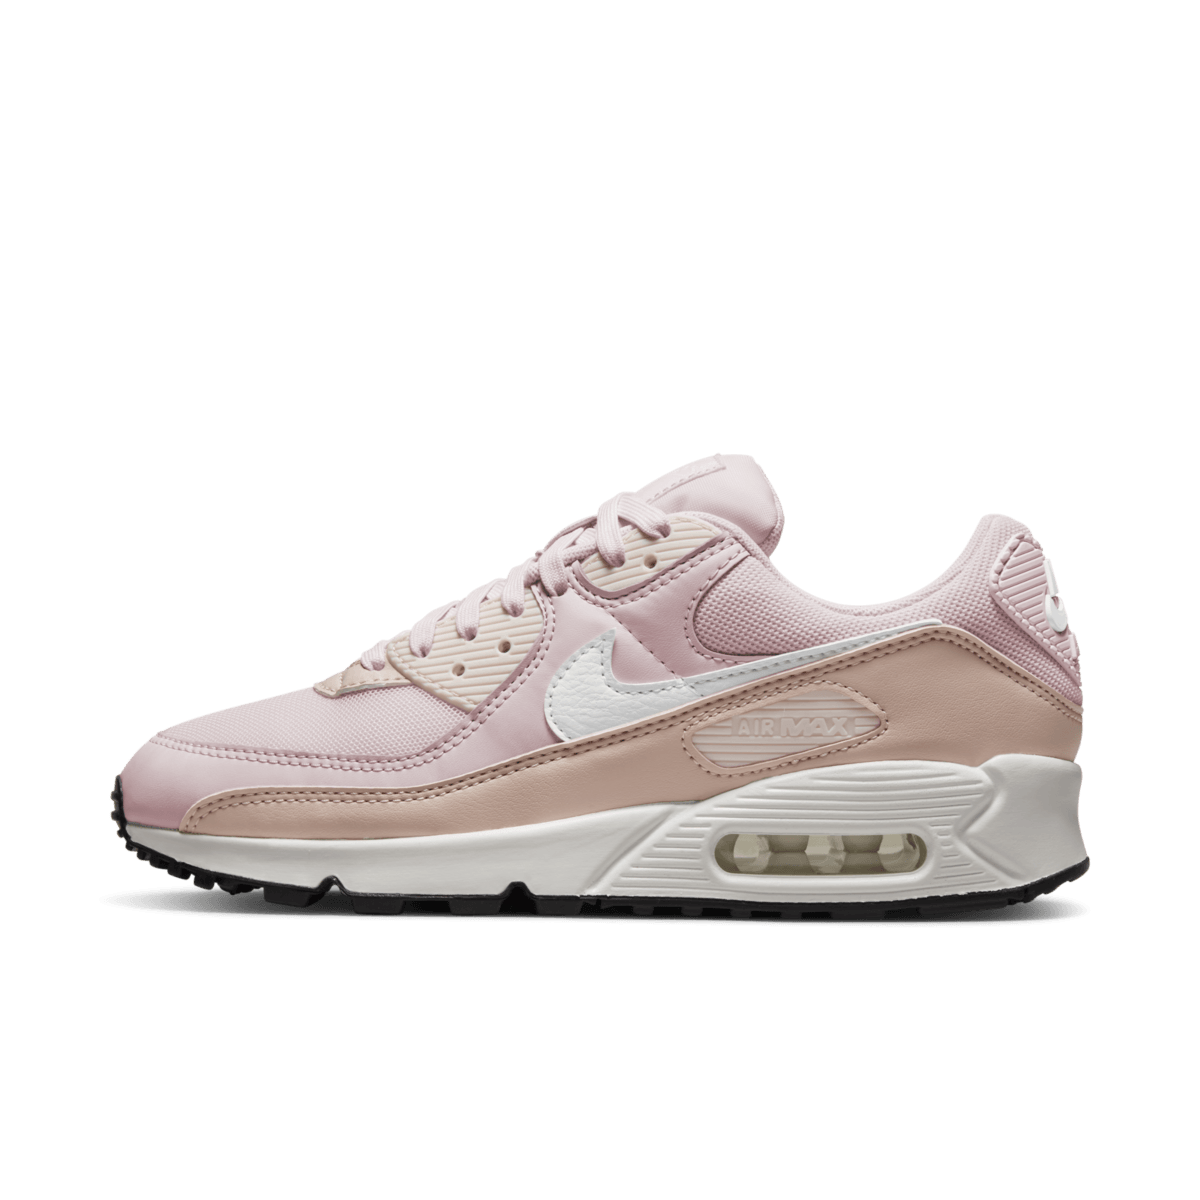 Nike Air Max 90 WMNS 'Barely Rose' DH8010-600